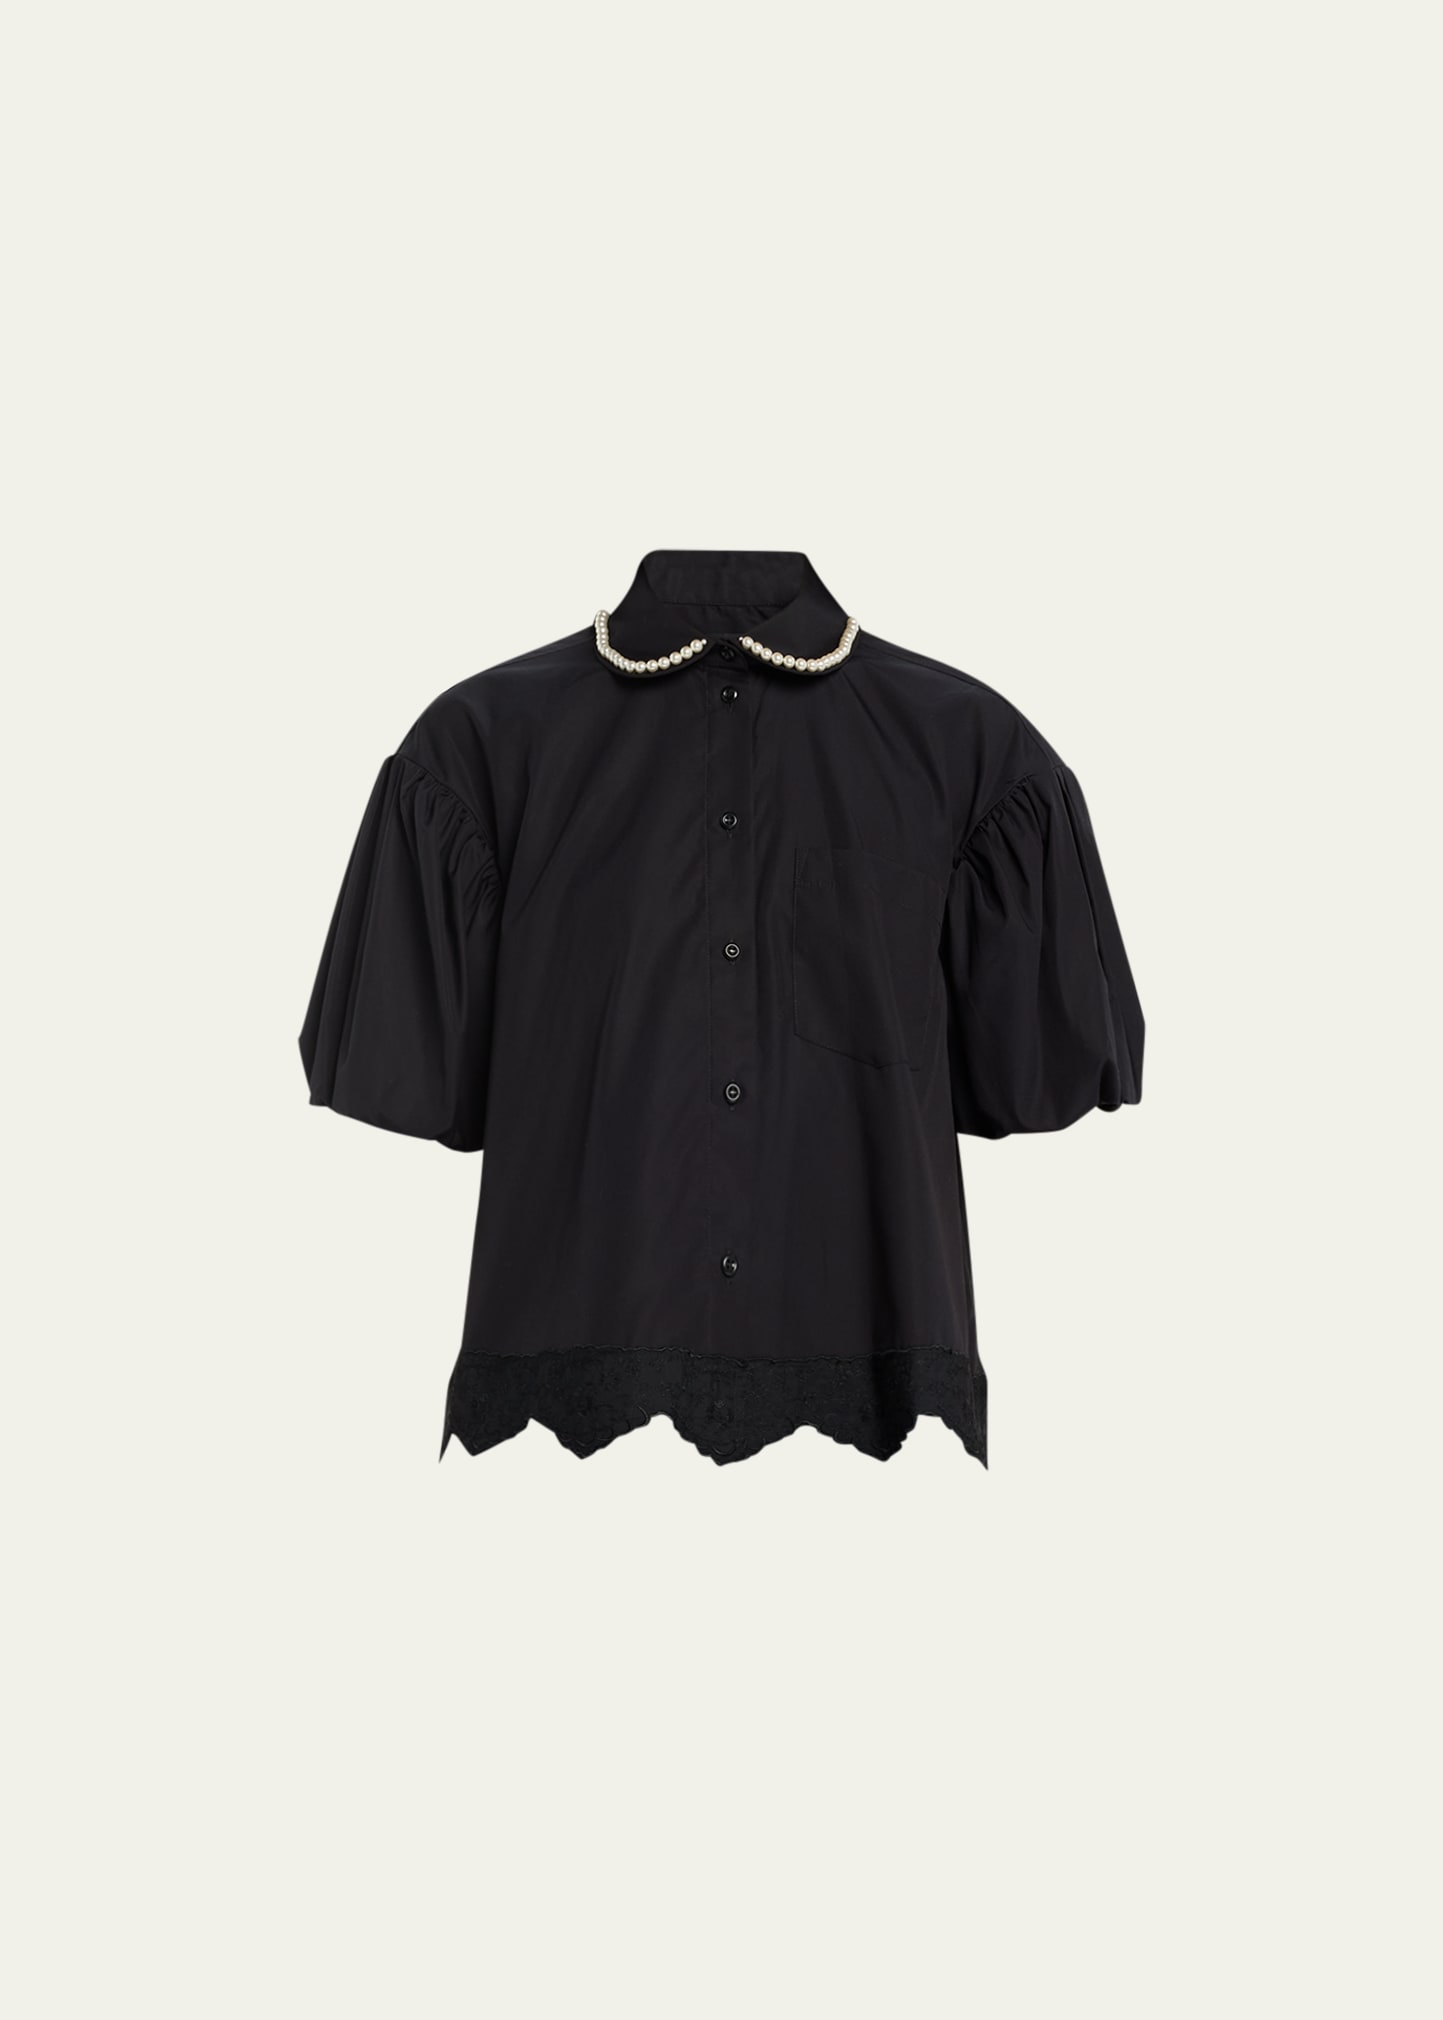 Simone Rocha Cropped Puff Sleeve Shirt With Embroidered Trim In Blackblackpearl